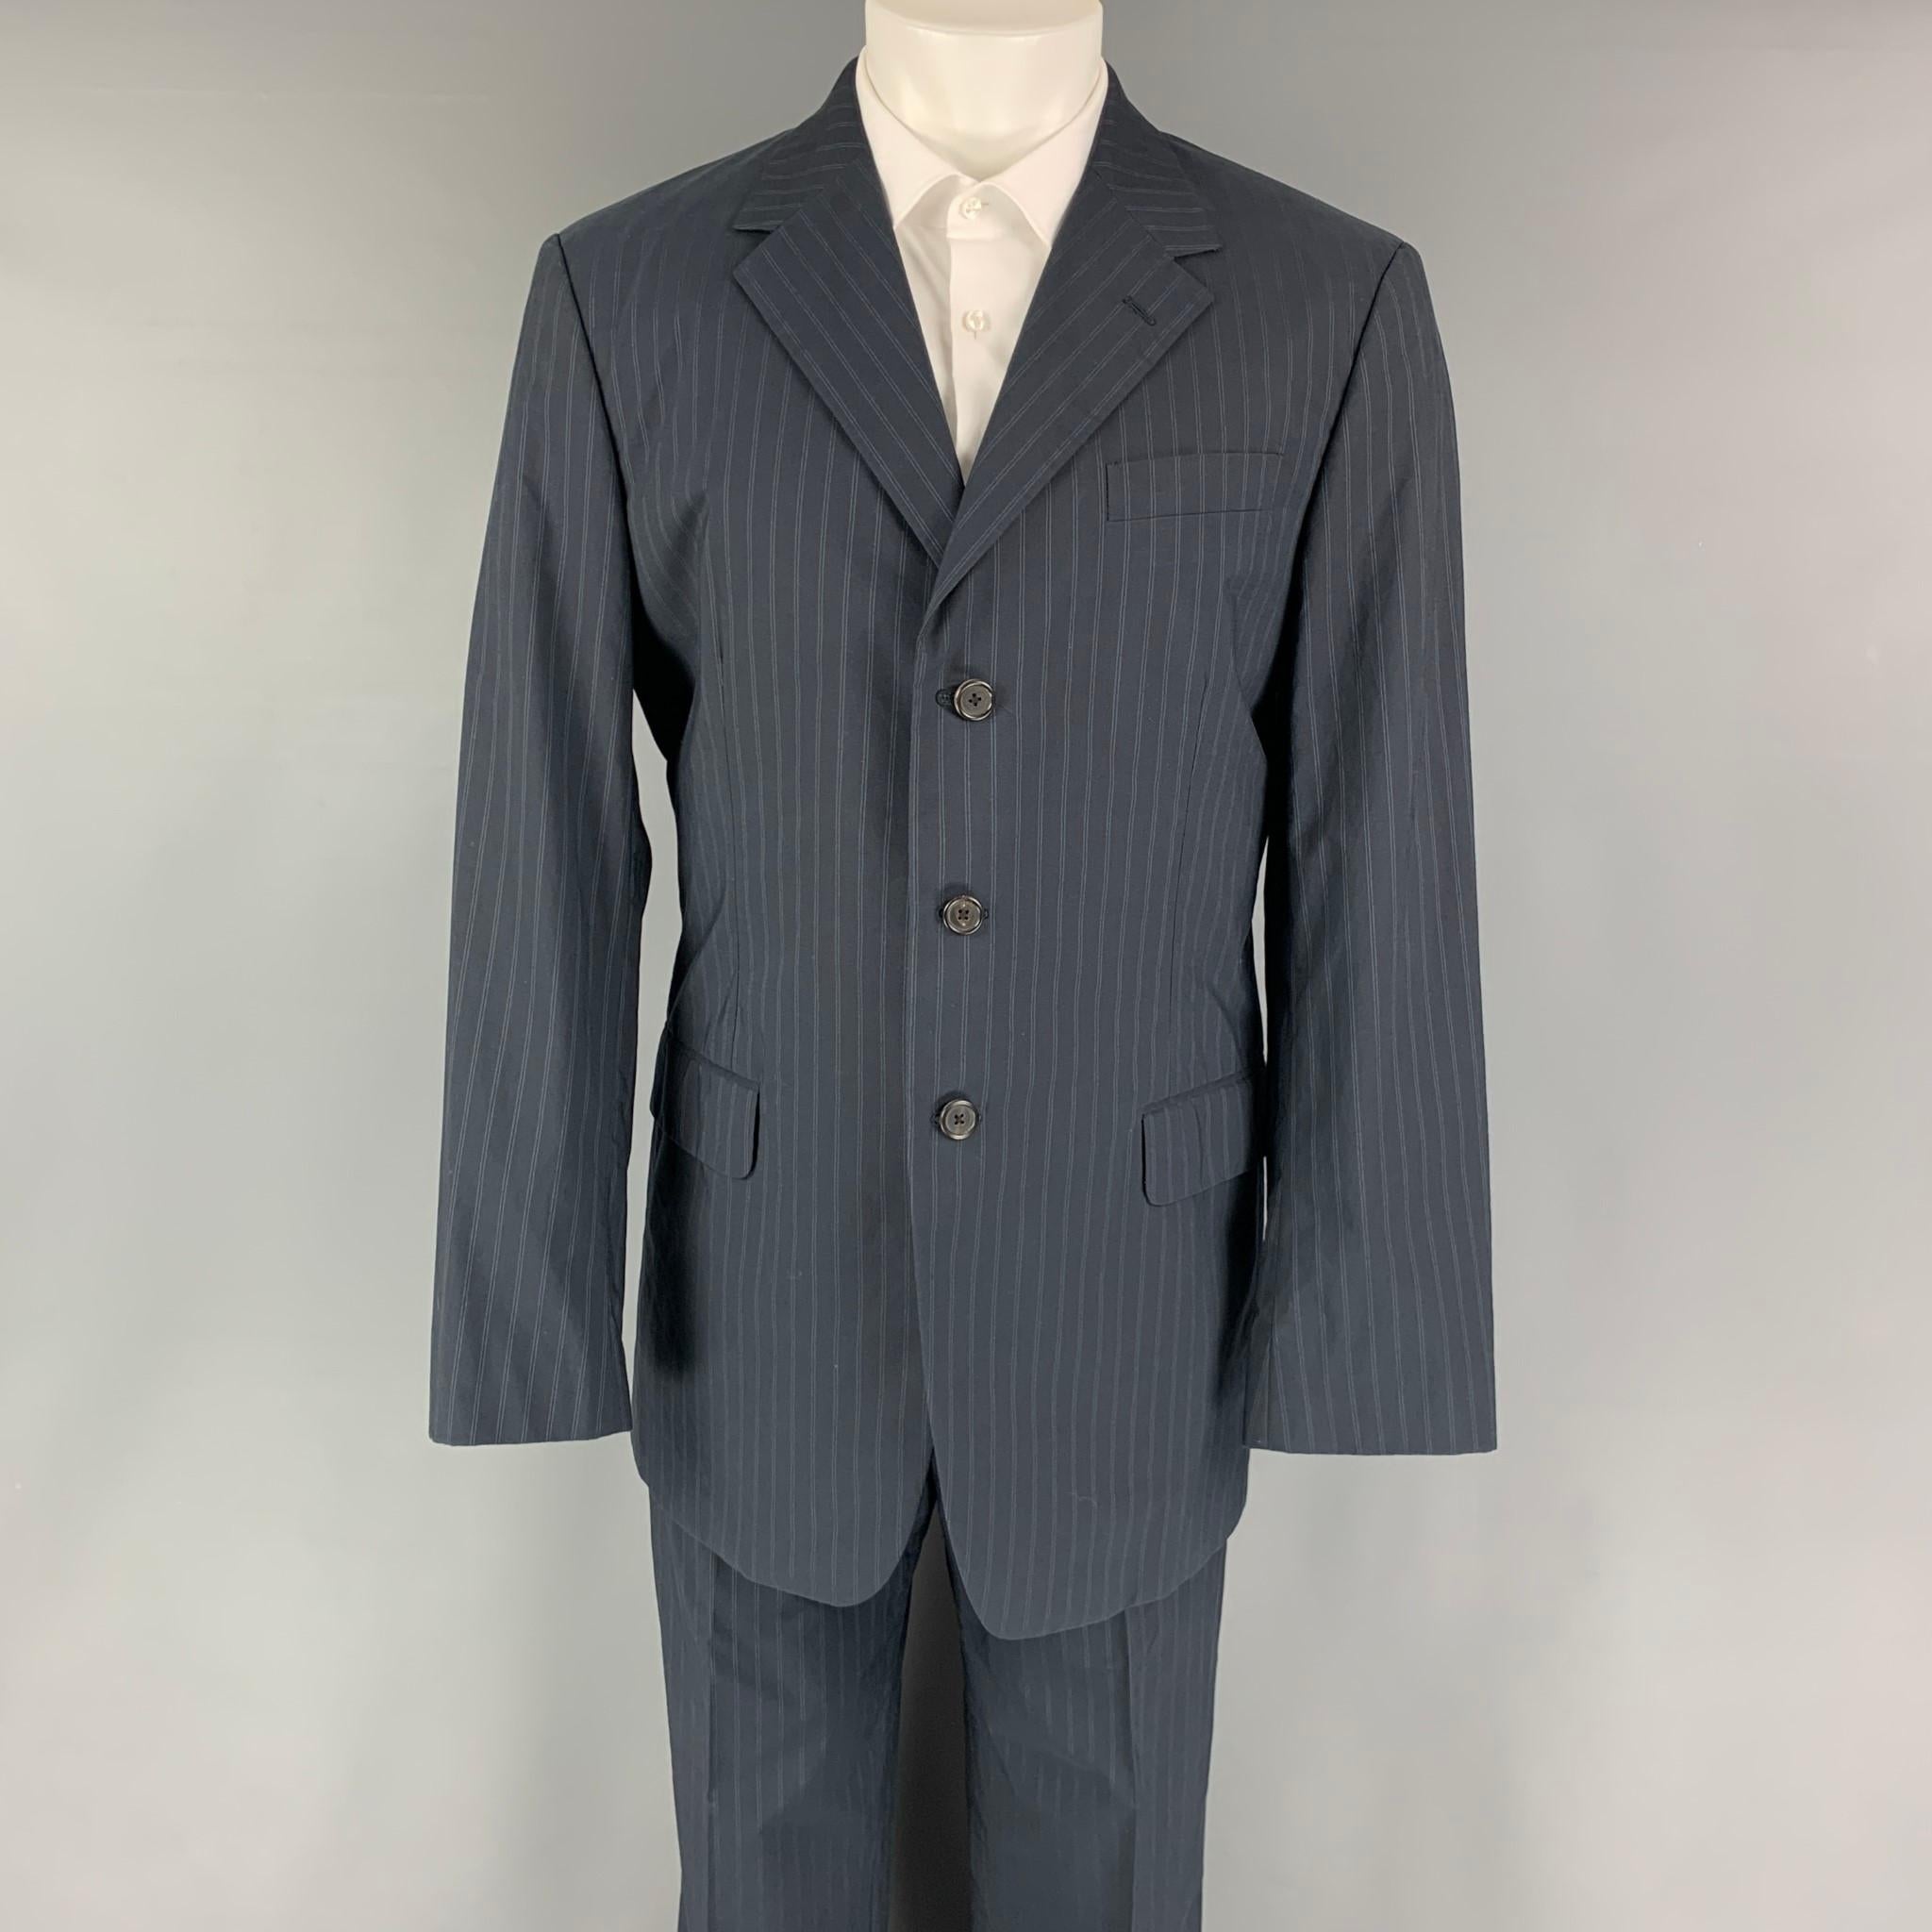 PRADA suit comes in a navy stripped cotton woven material with a full liner and includes a single breasted, three button sport coat with a notch lapel and matching flat front trousers. Made in Italy.

Excellent Pre-Owned Condition.
Marked: